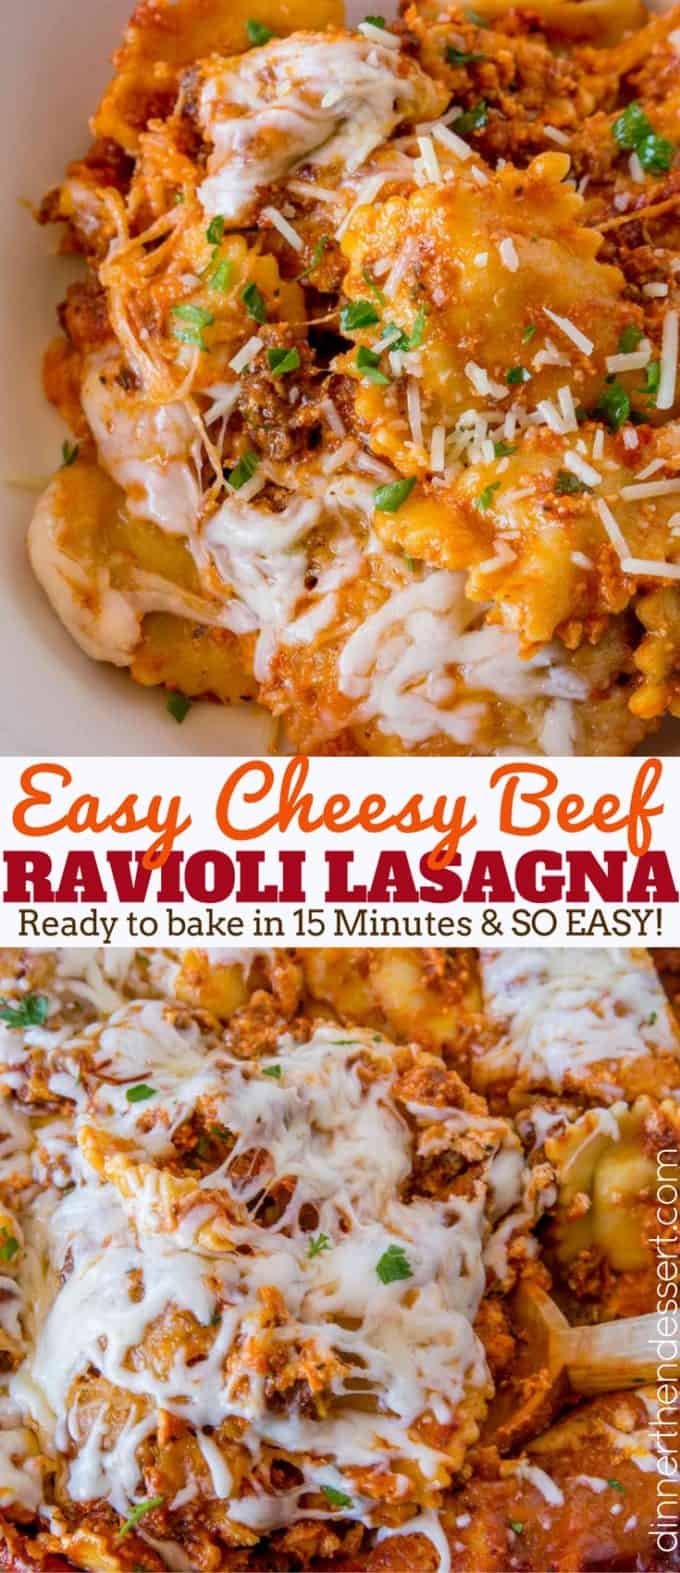 Easy Ravioli Lasagna Bake with three cheeses and ground beef is an easy weeknight meal you can prep ahead that tastes like lasagna with half the effort! #cheese #pasta #ravioli #lasagna #casserole